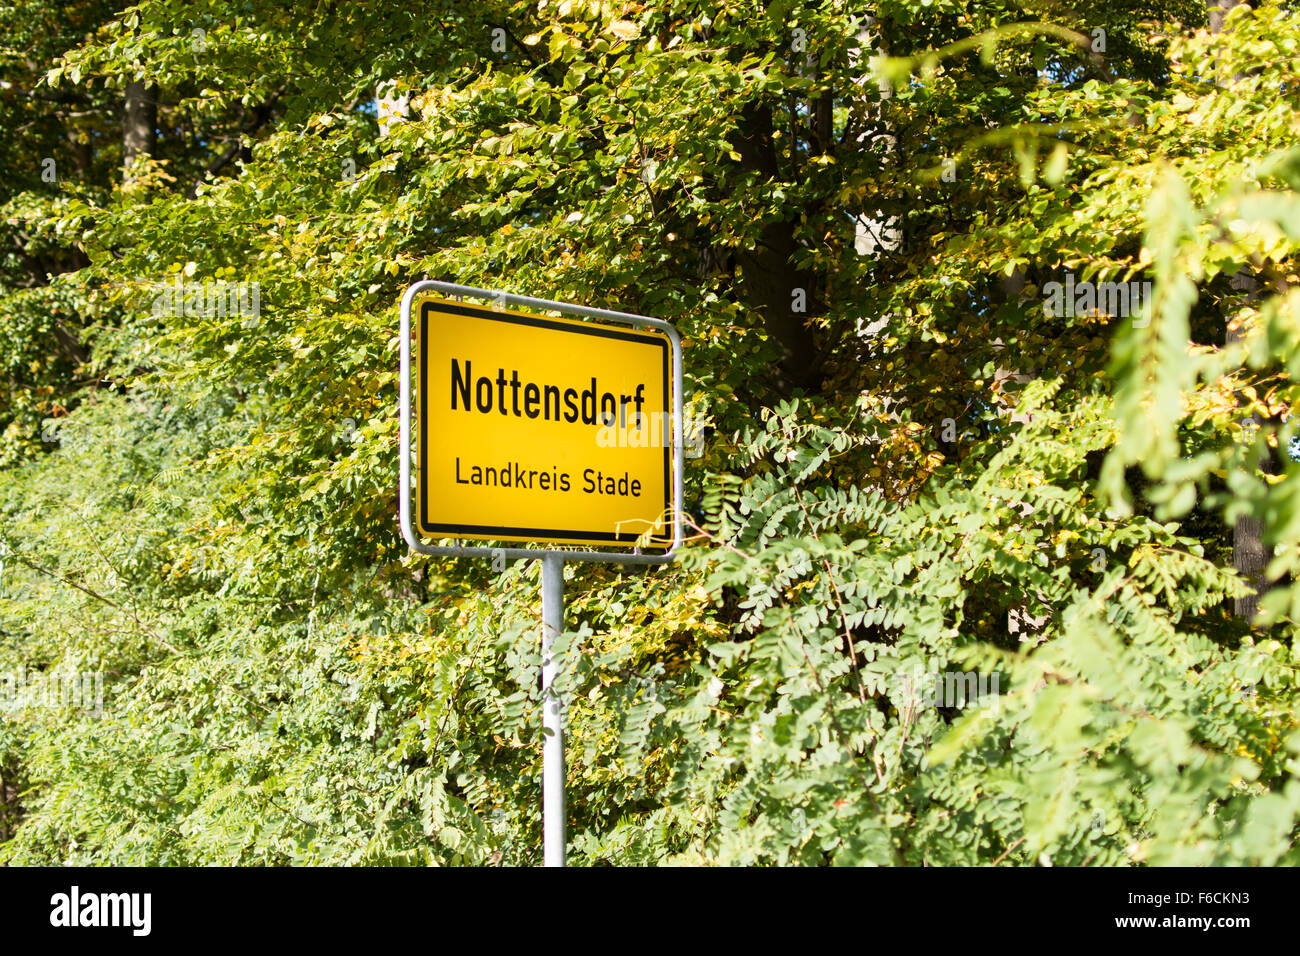 General city entrance sign Nottensdorf Stock Photo